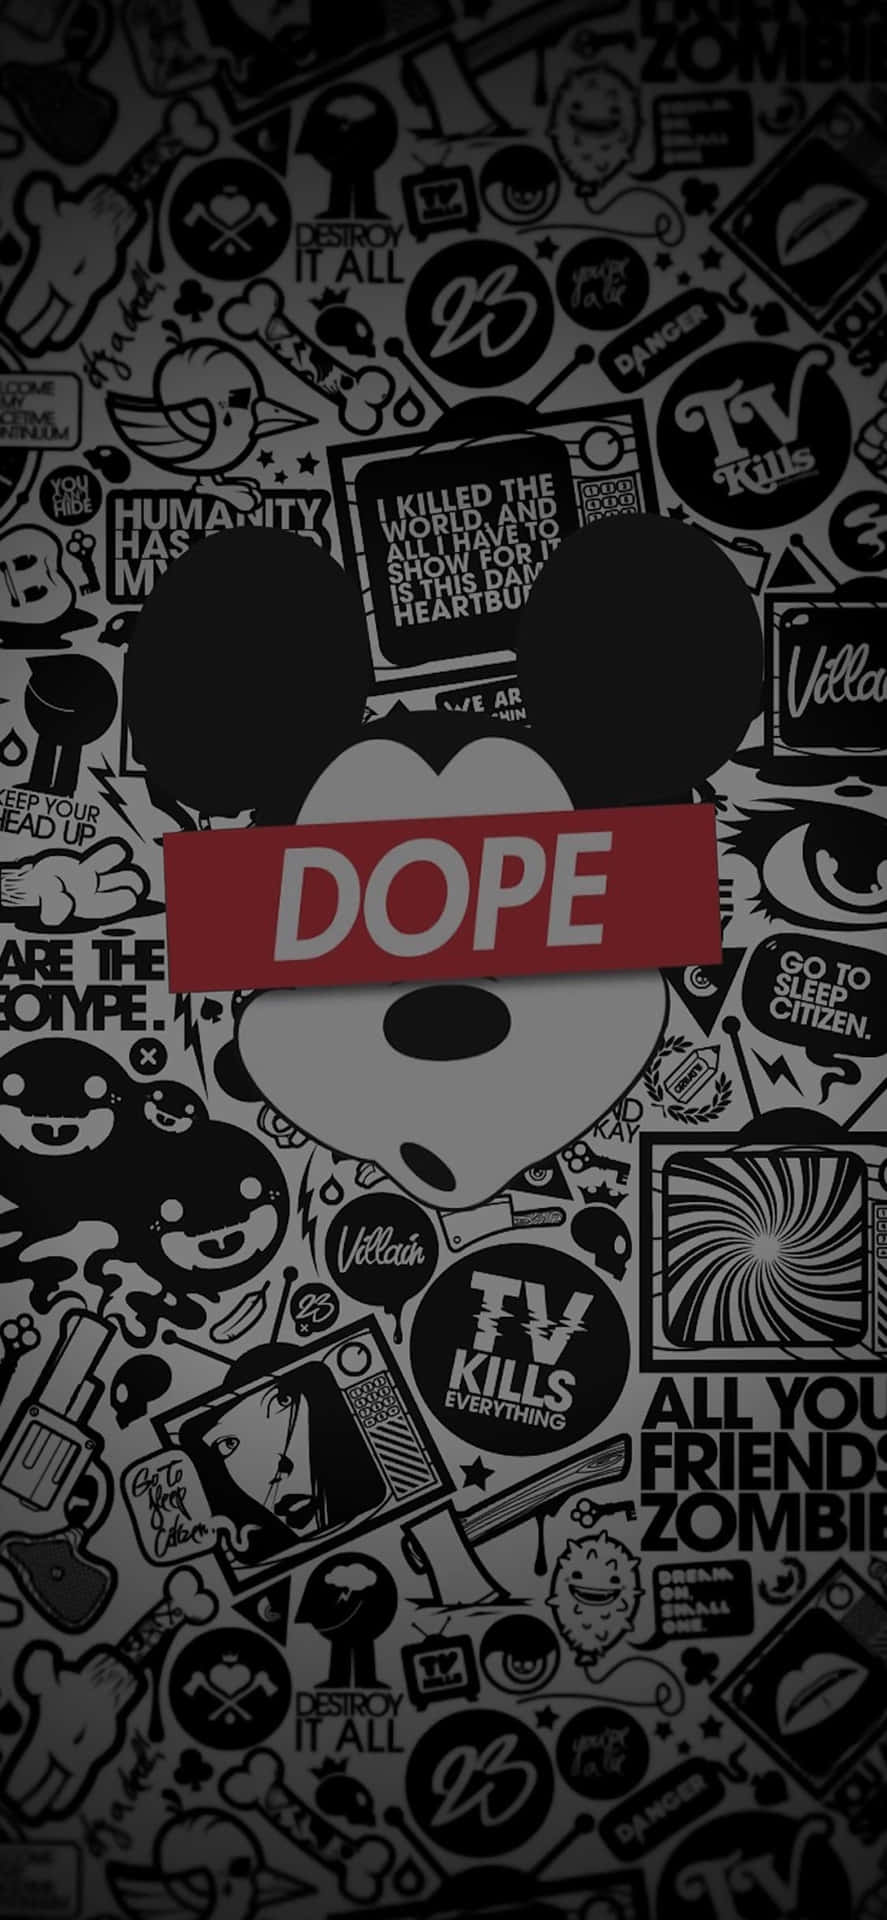 Cool Instagram Mickey Mouse Dope Wallpaper